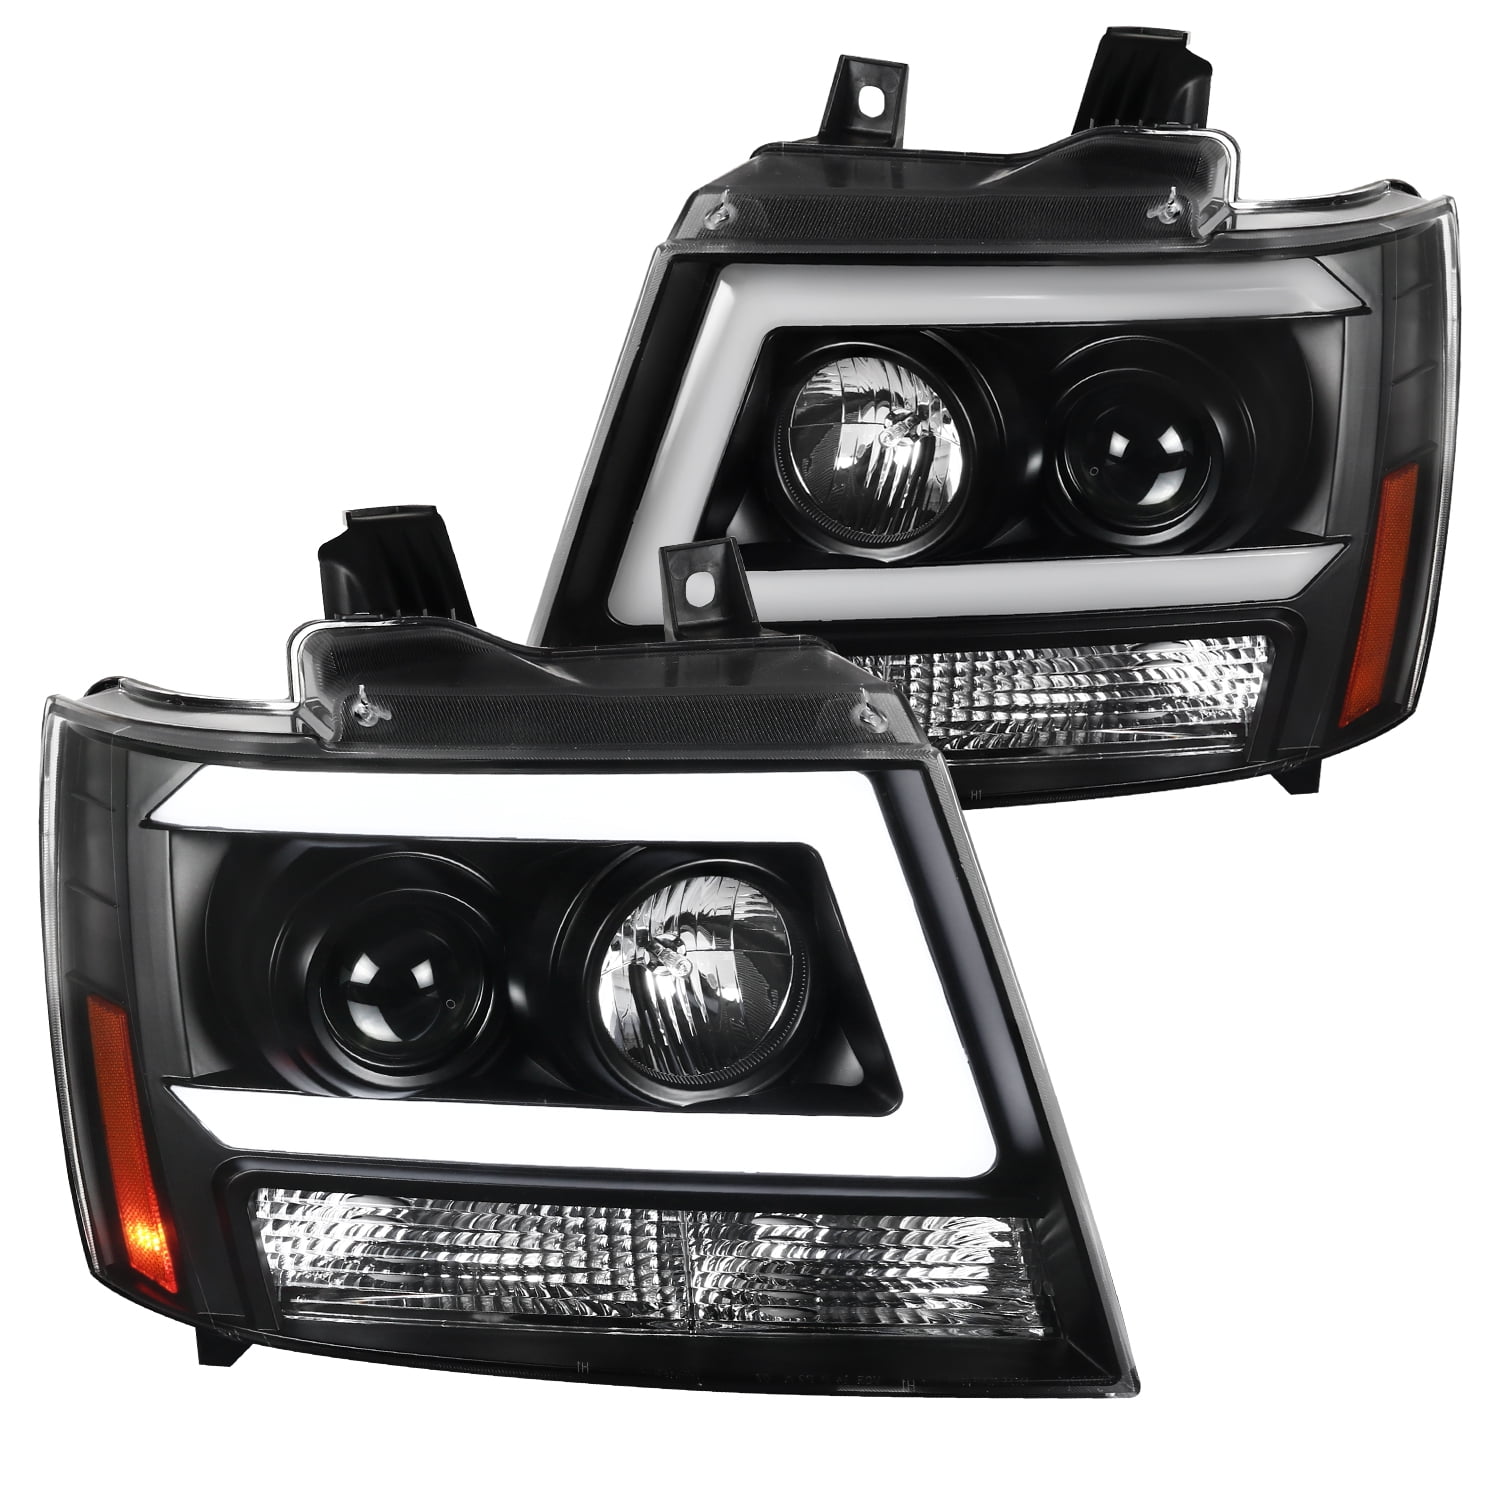 Spec-D Tuning LED Strip Bar Black Projector Headlights w/Turn Signal Compatible with Chevy Avalanche 2007-2013 L+R Pair Head Light Lamp Assembly 2007-2014 Tahoe Suburban 